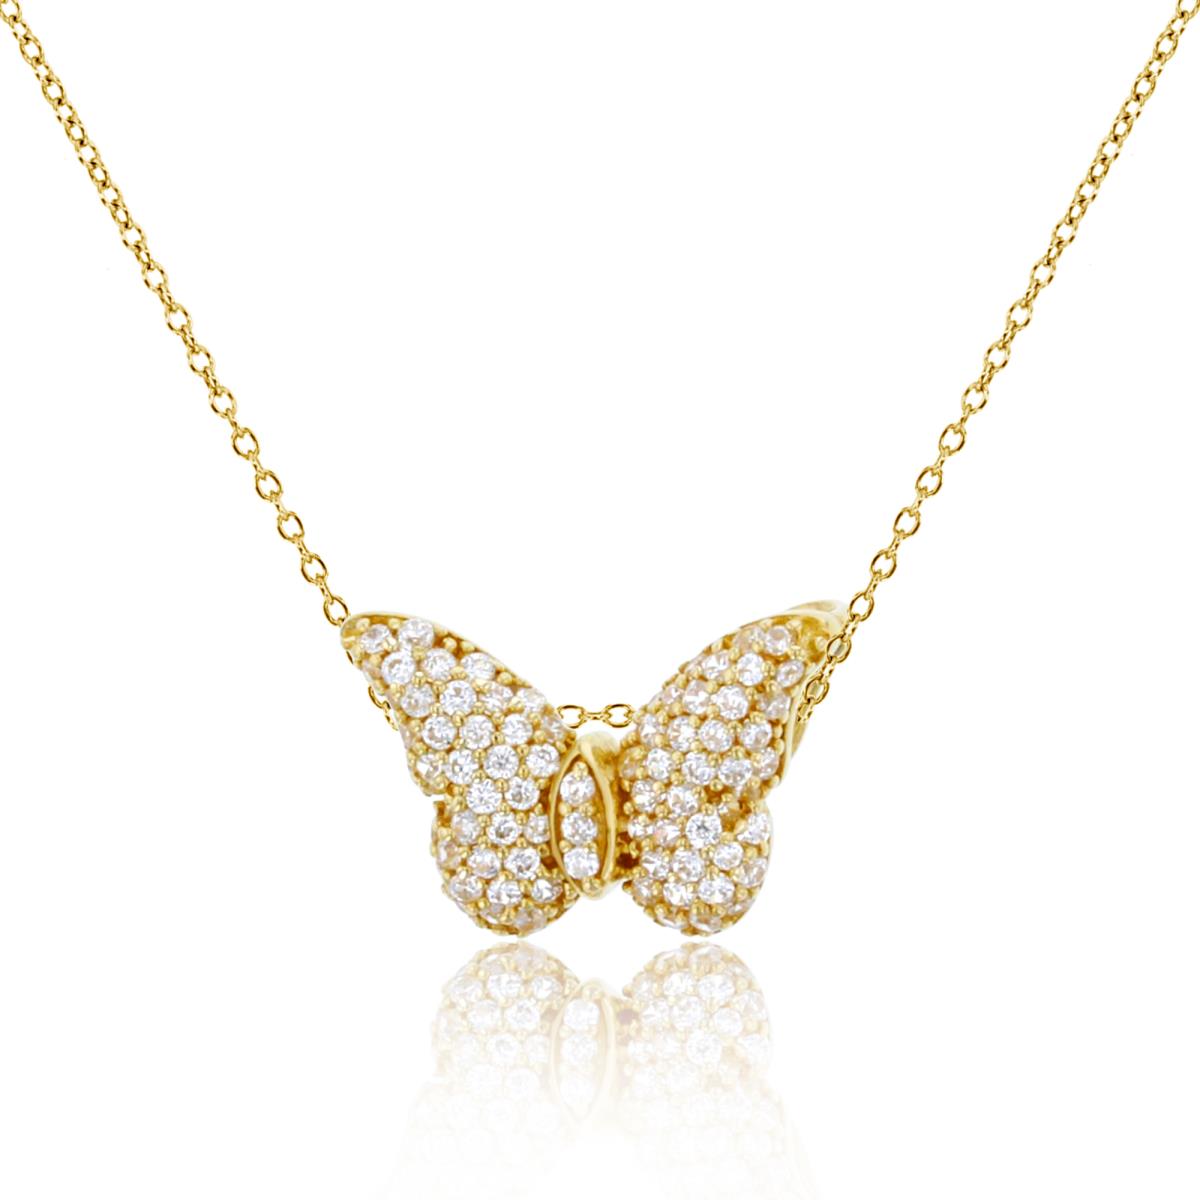 14K Yellow Gold 0.324 Cttw Diamond Polished Butterfly 18" Necklace